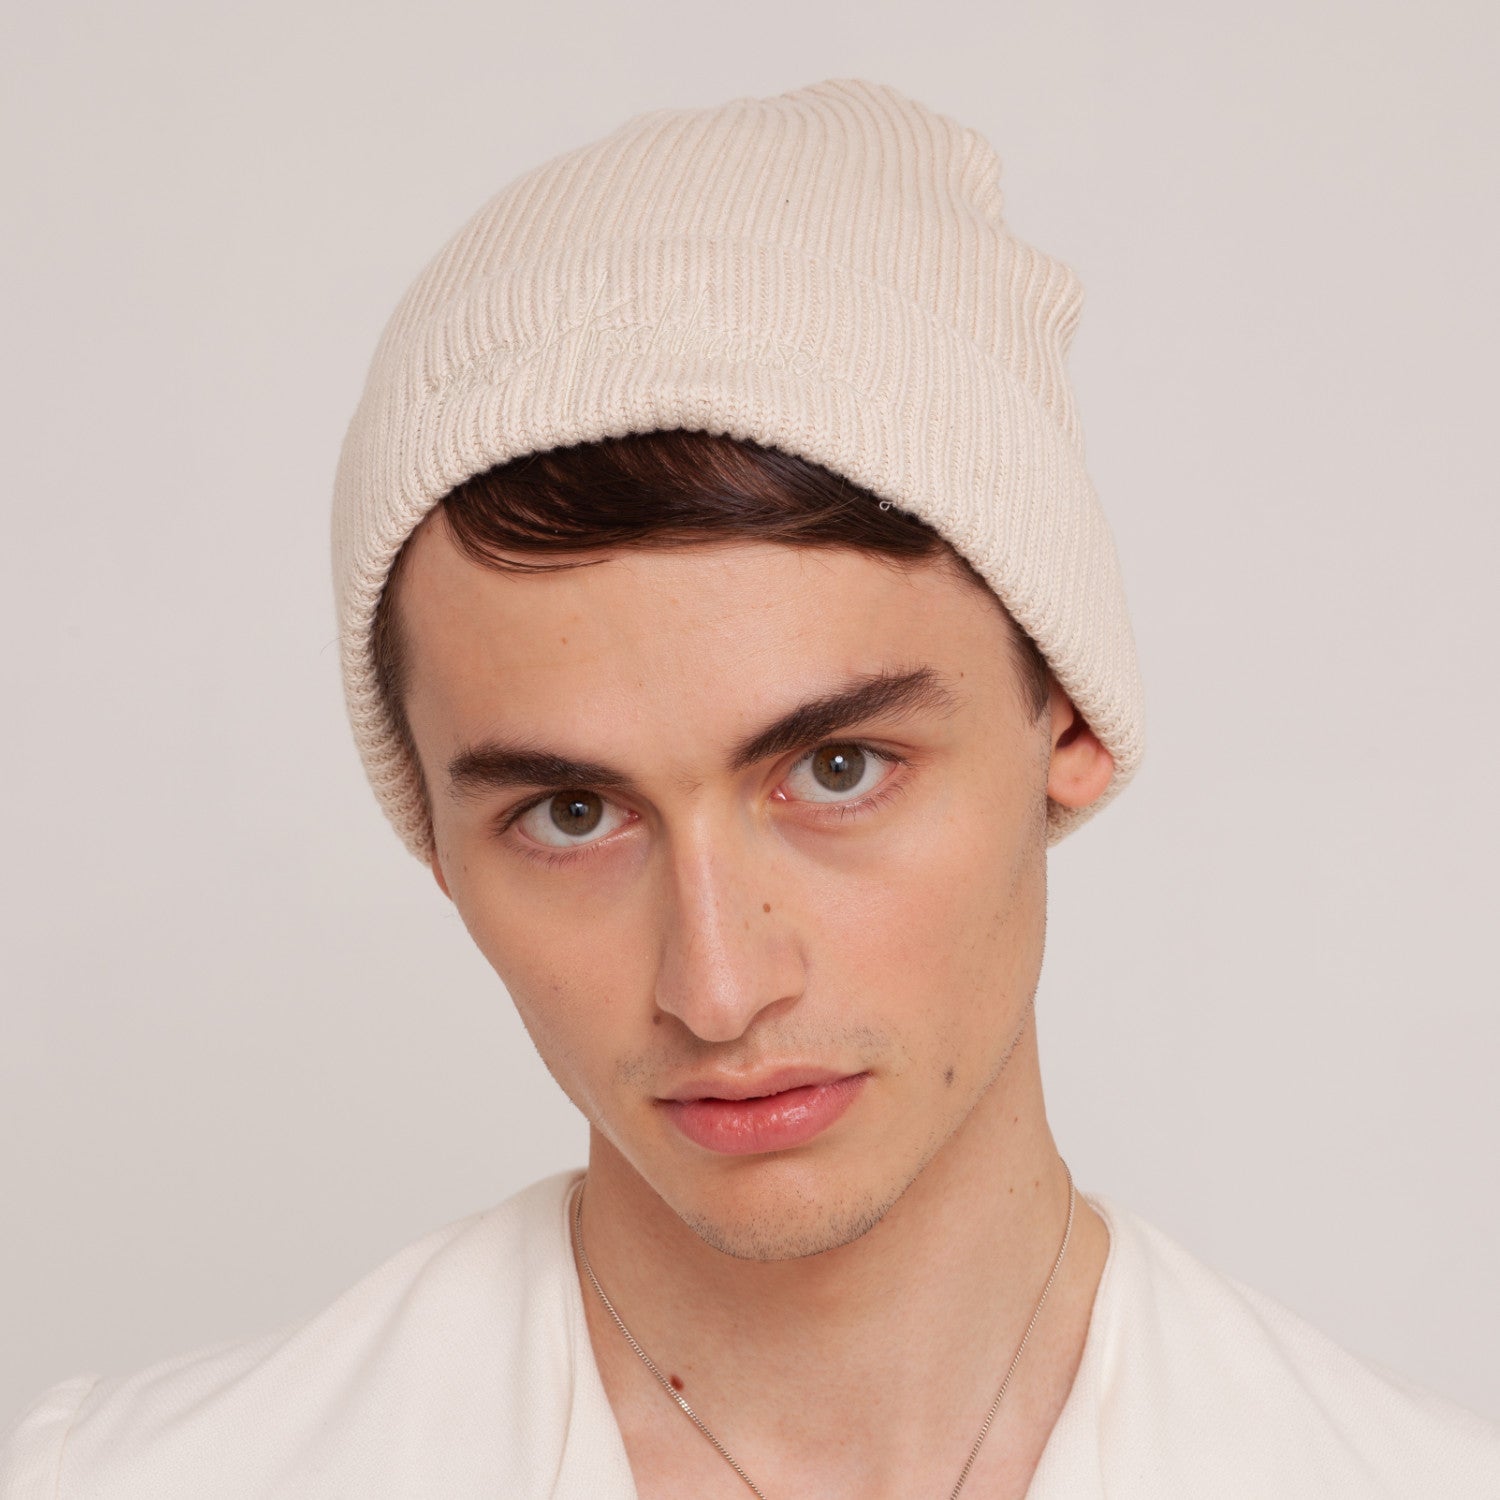 Embroidered organic cotton beanie